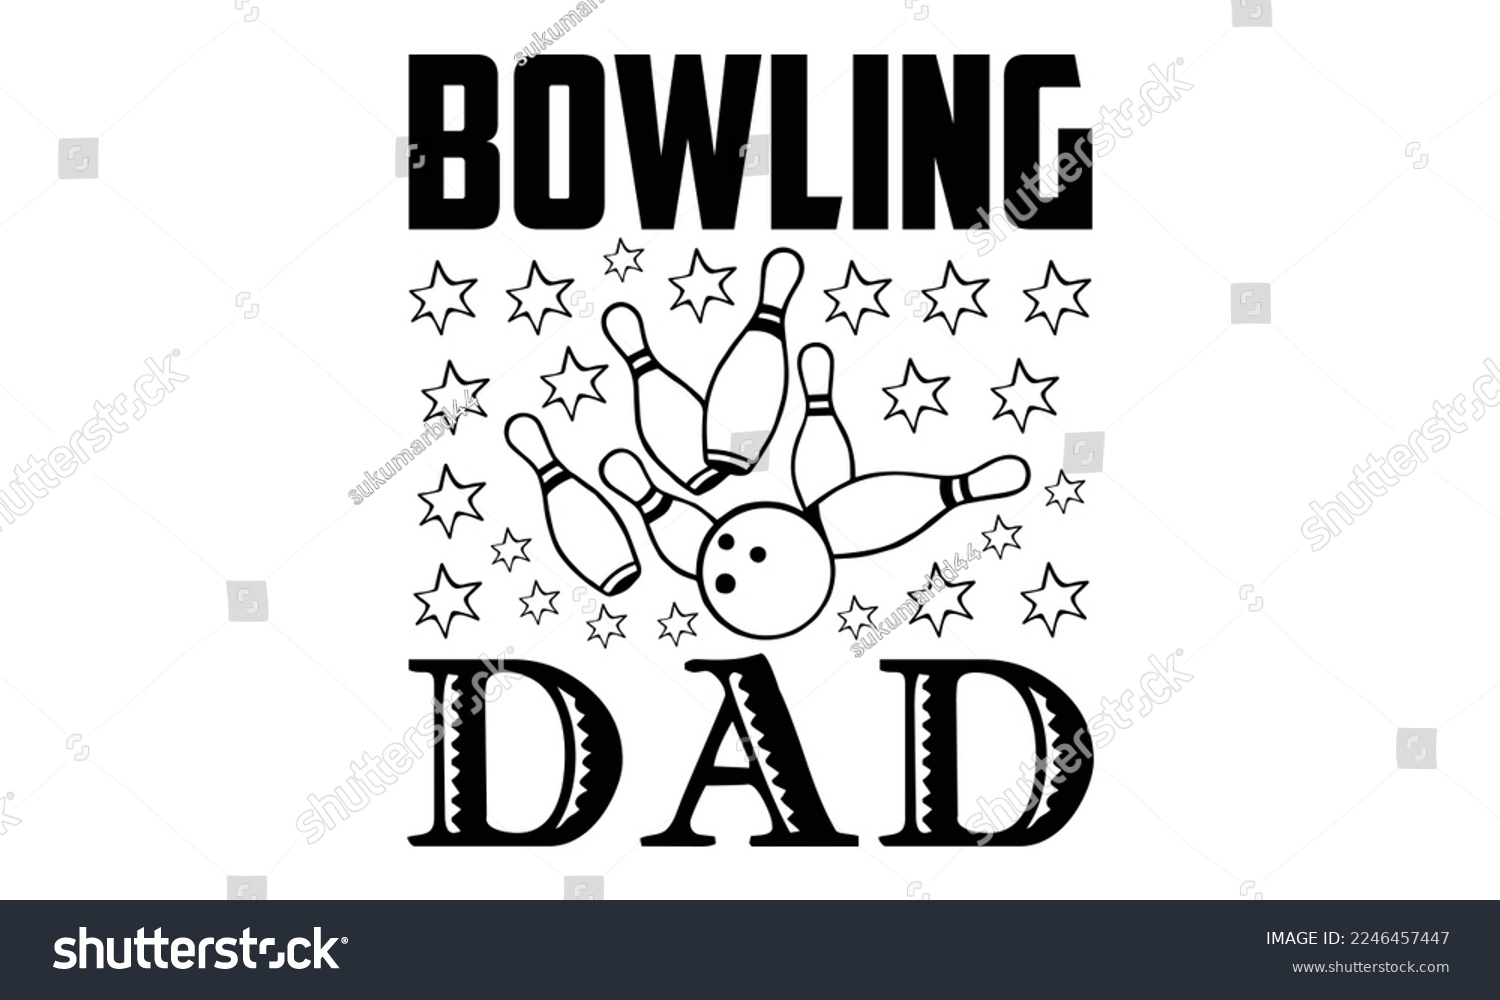 SVG of Bowling Dad - Bowling T-shirt Design, Illustration for prints on bags, posters, cards, mugs, svg for Cutting Machine, Silhouette Cameo, Hand drawn lettering phrase. svg